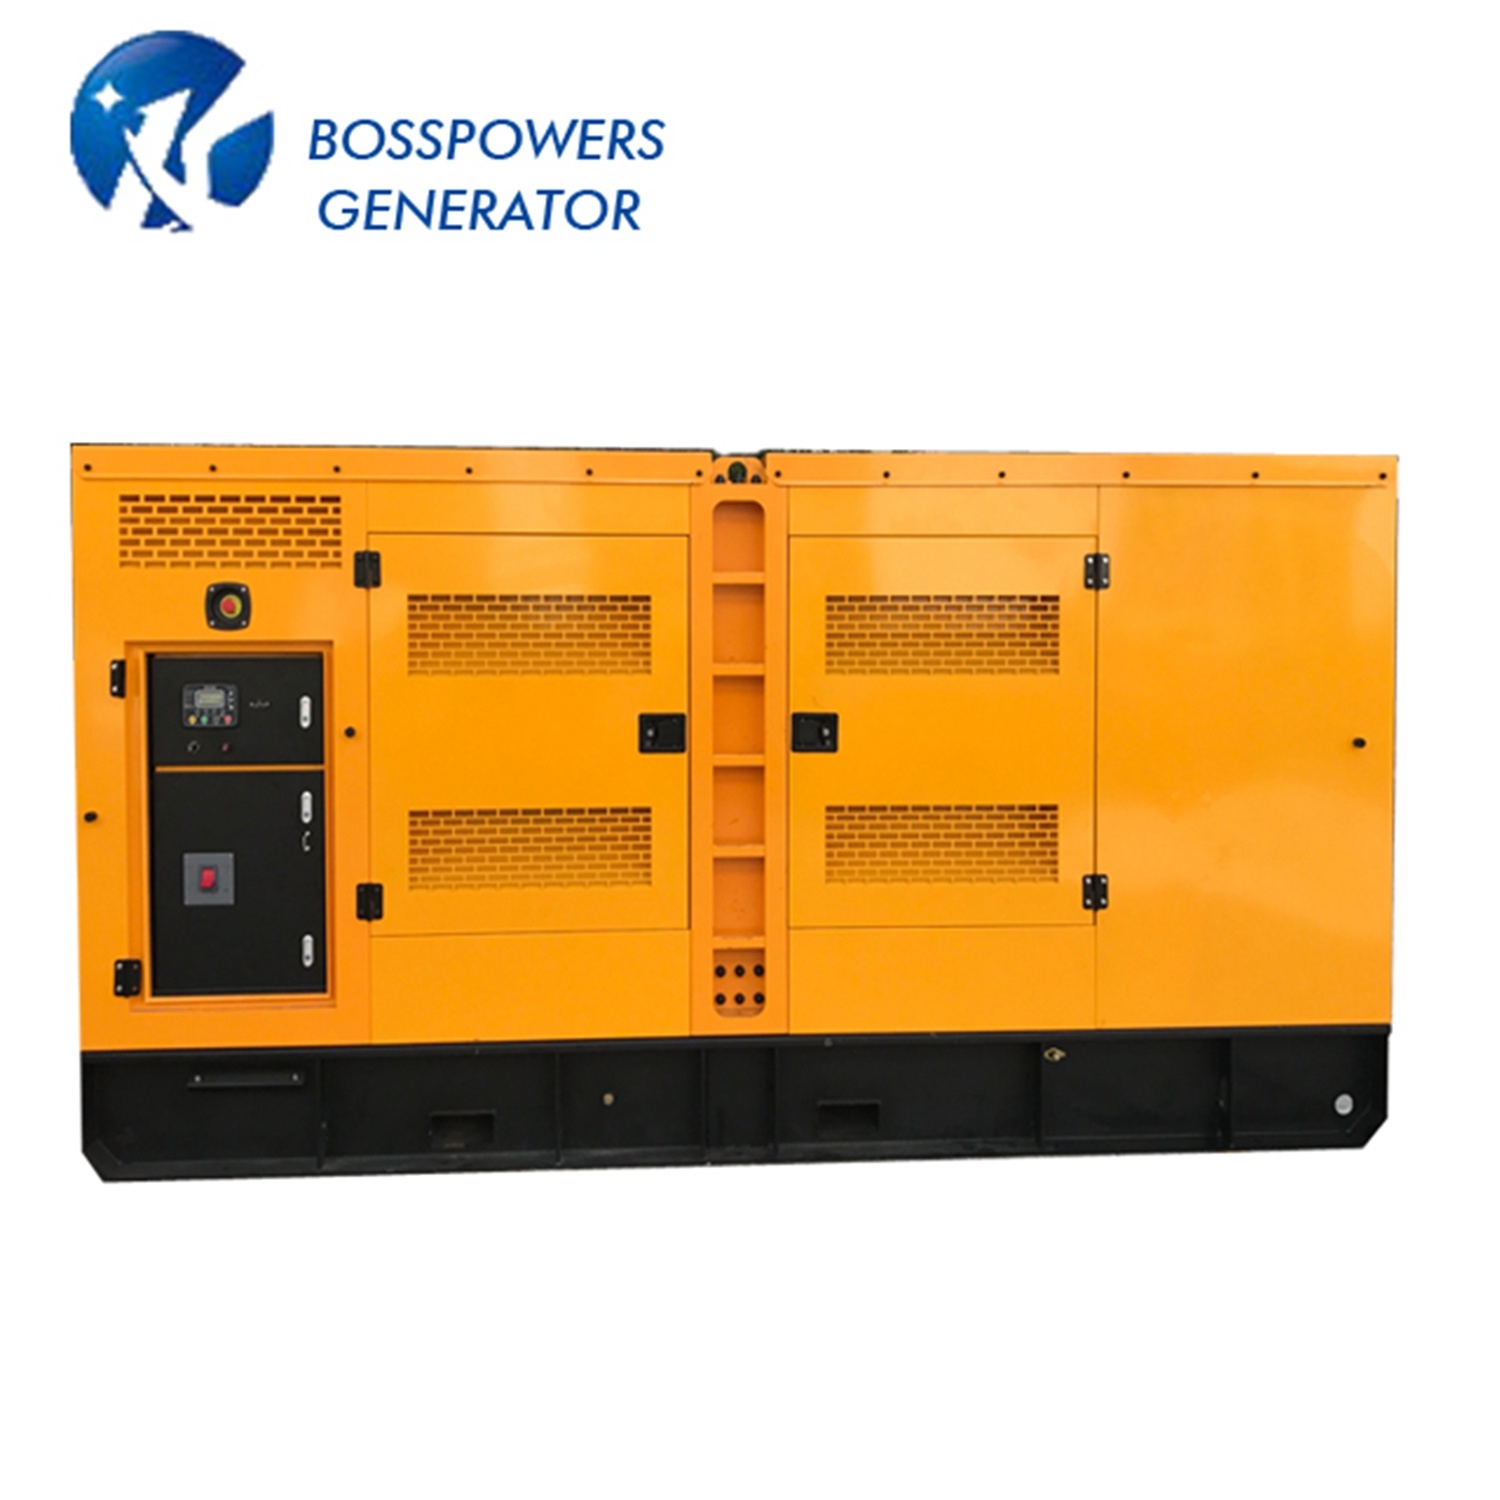 3 Phase 650kw Kaipu Engine Silent Generator Industrial Power Plant